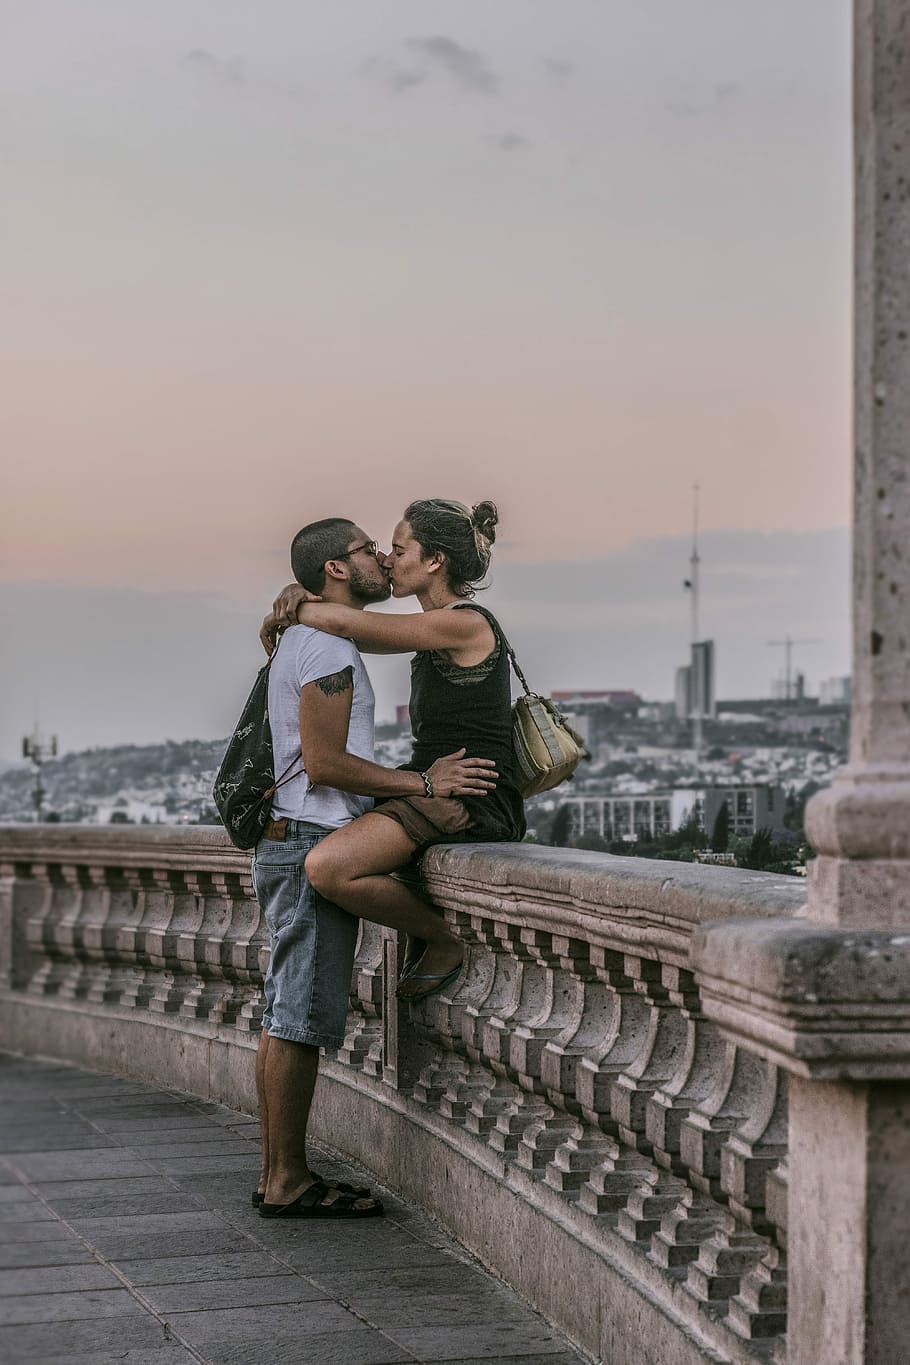 man, woman, kissing, daytime, viewpoint, couple, kiss, sunset, romantico, relationship